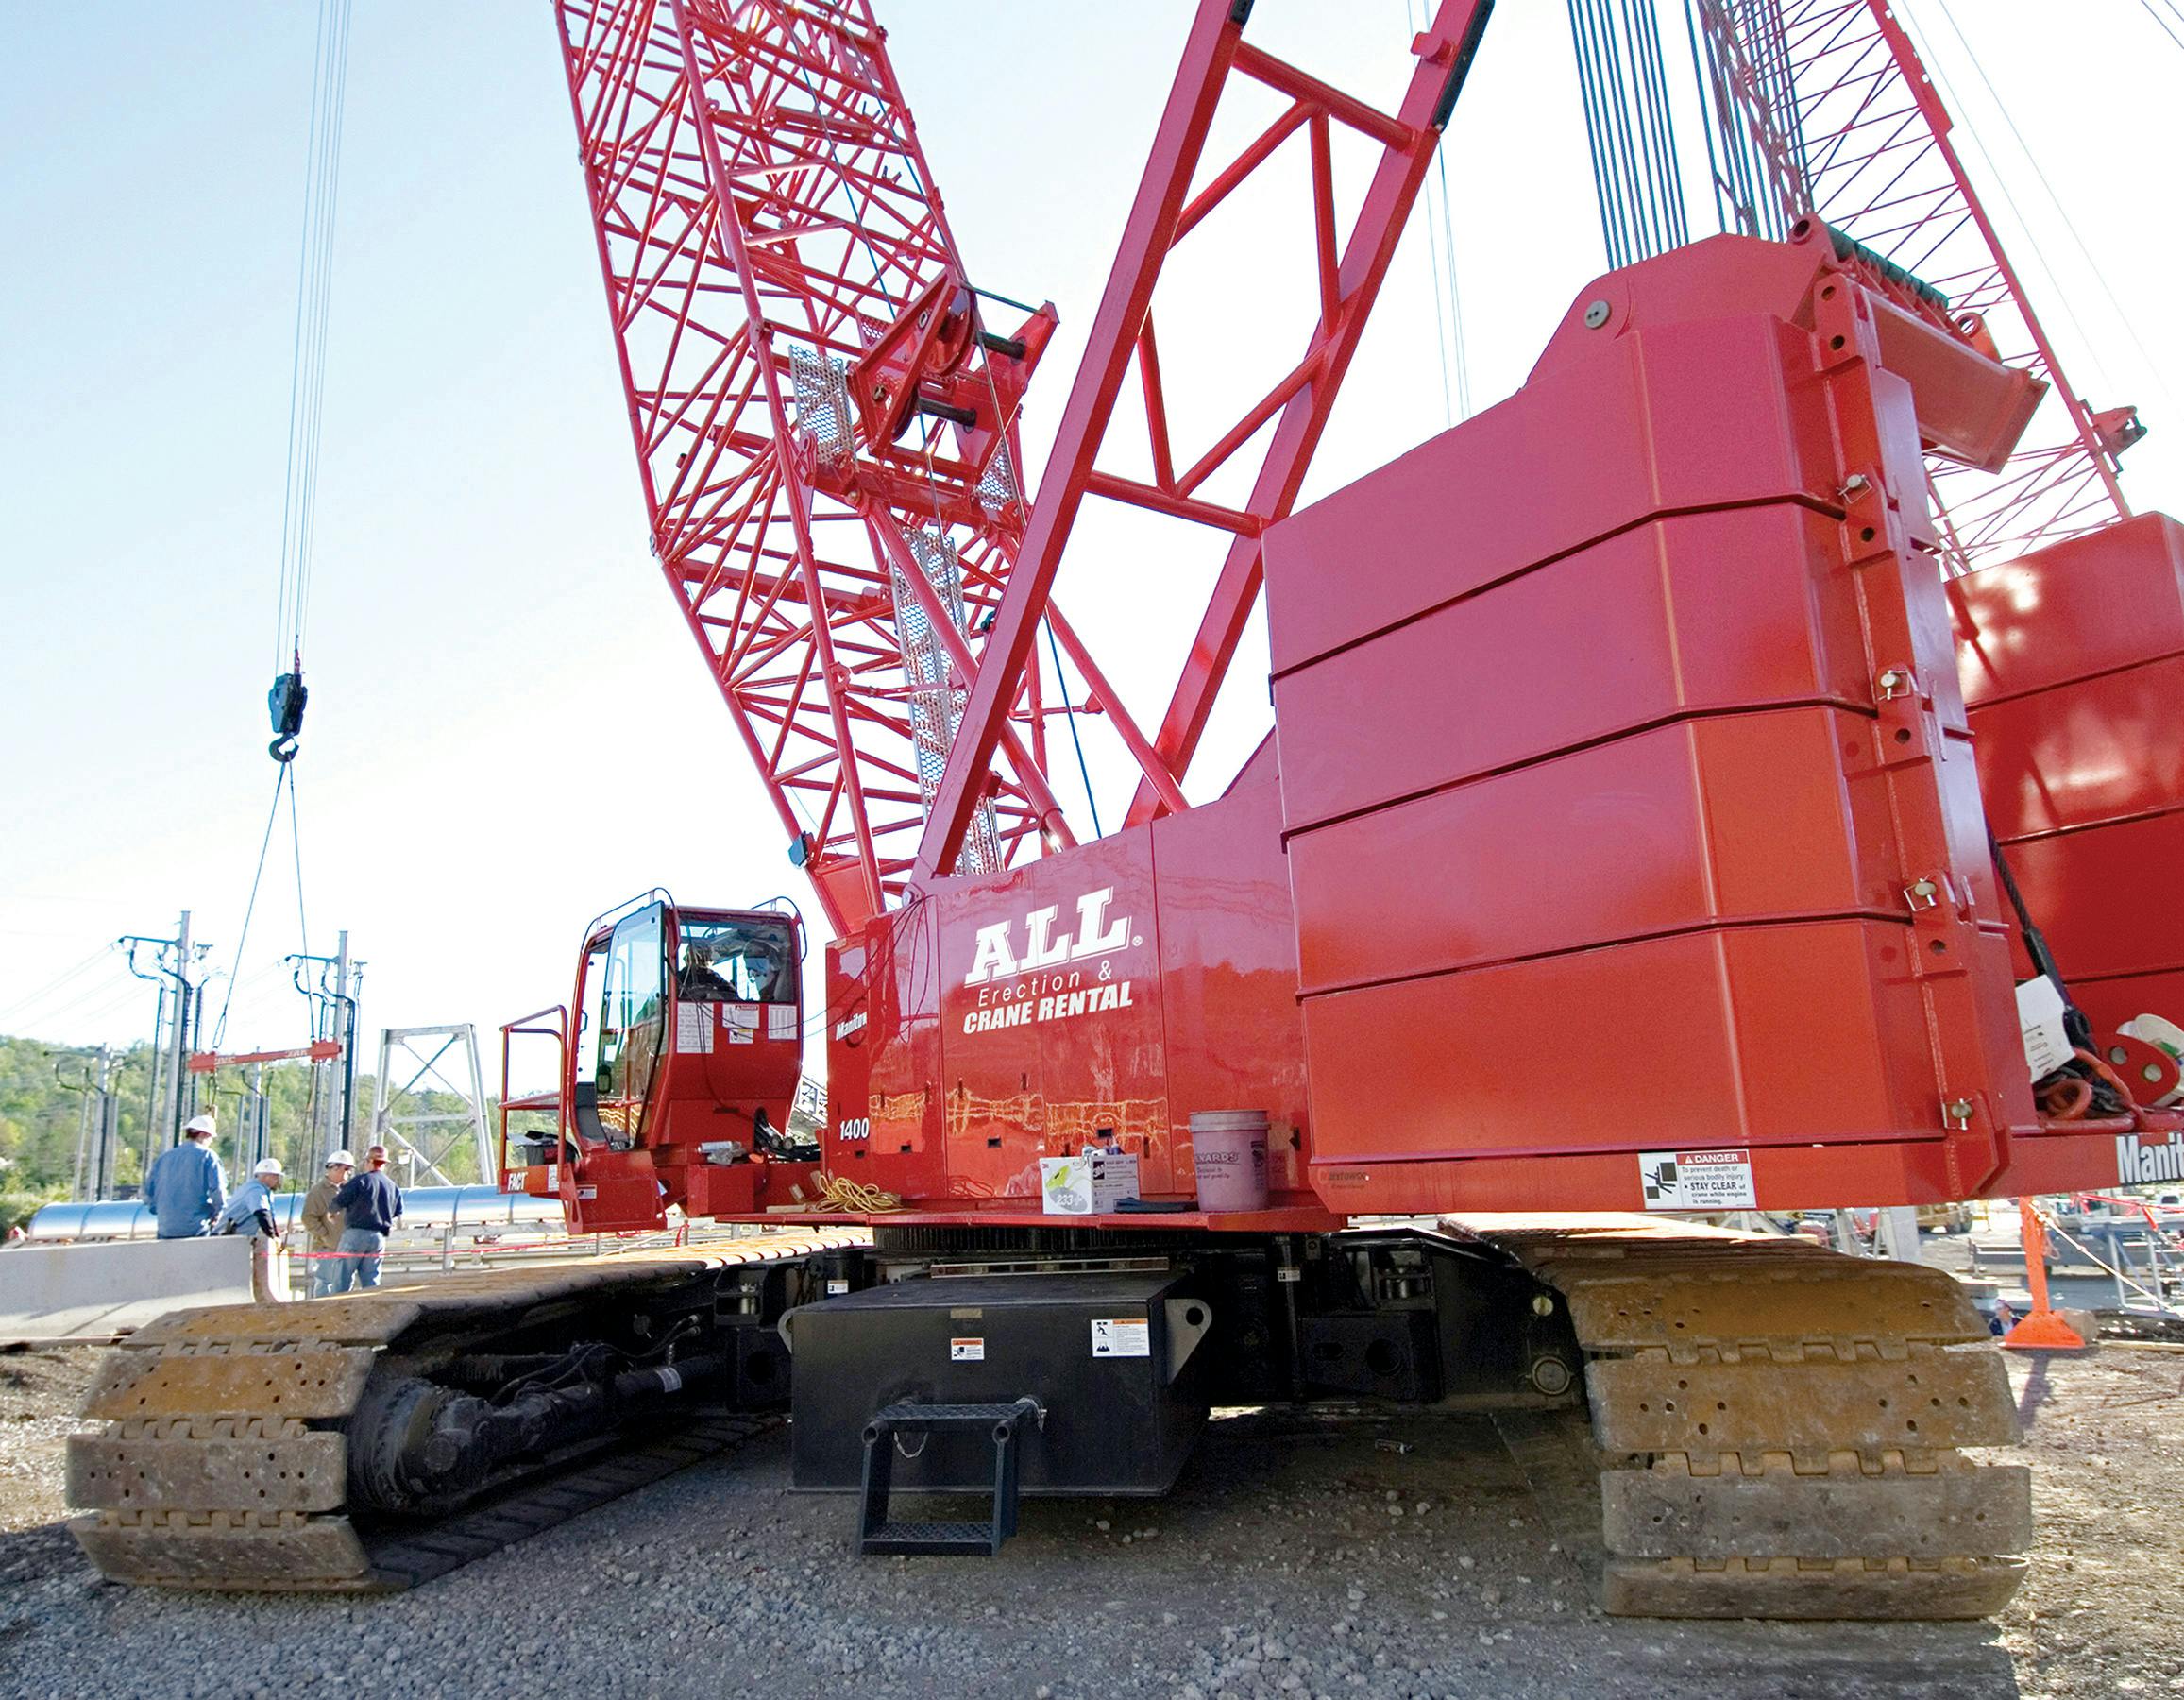 ALL Adds 30 Cranes and Aerial Lifts to Fleet | Construction News